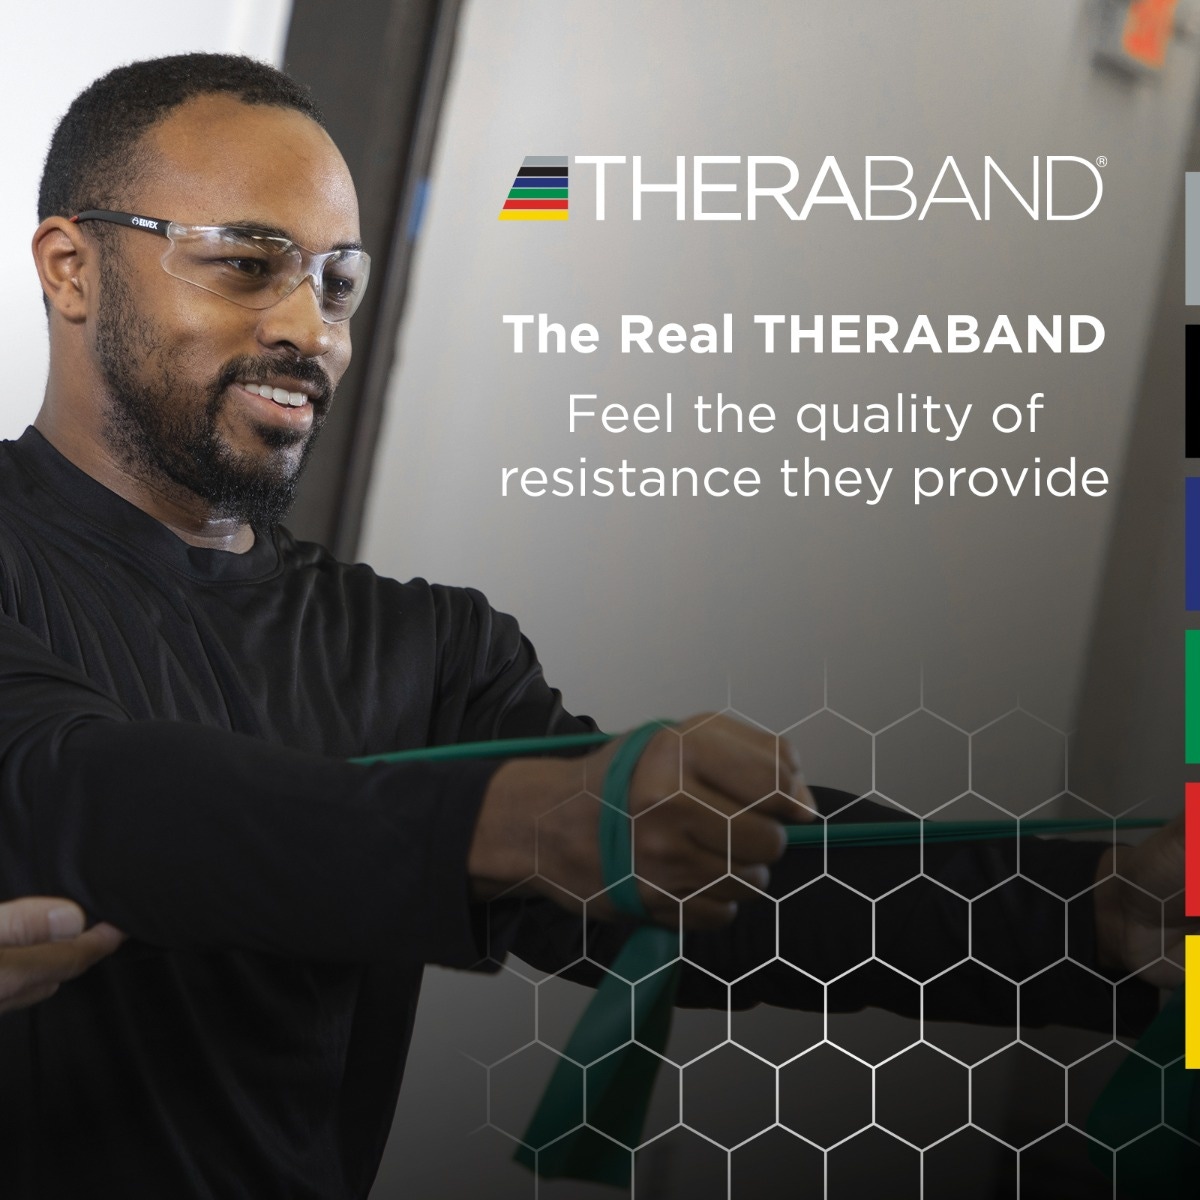 THERABAND Professional Latex Resistance Bands - All Resistance Levels